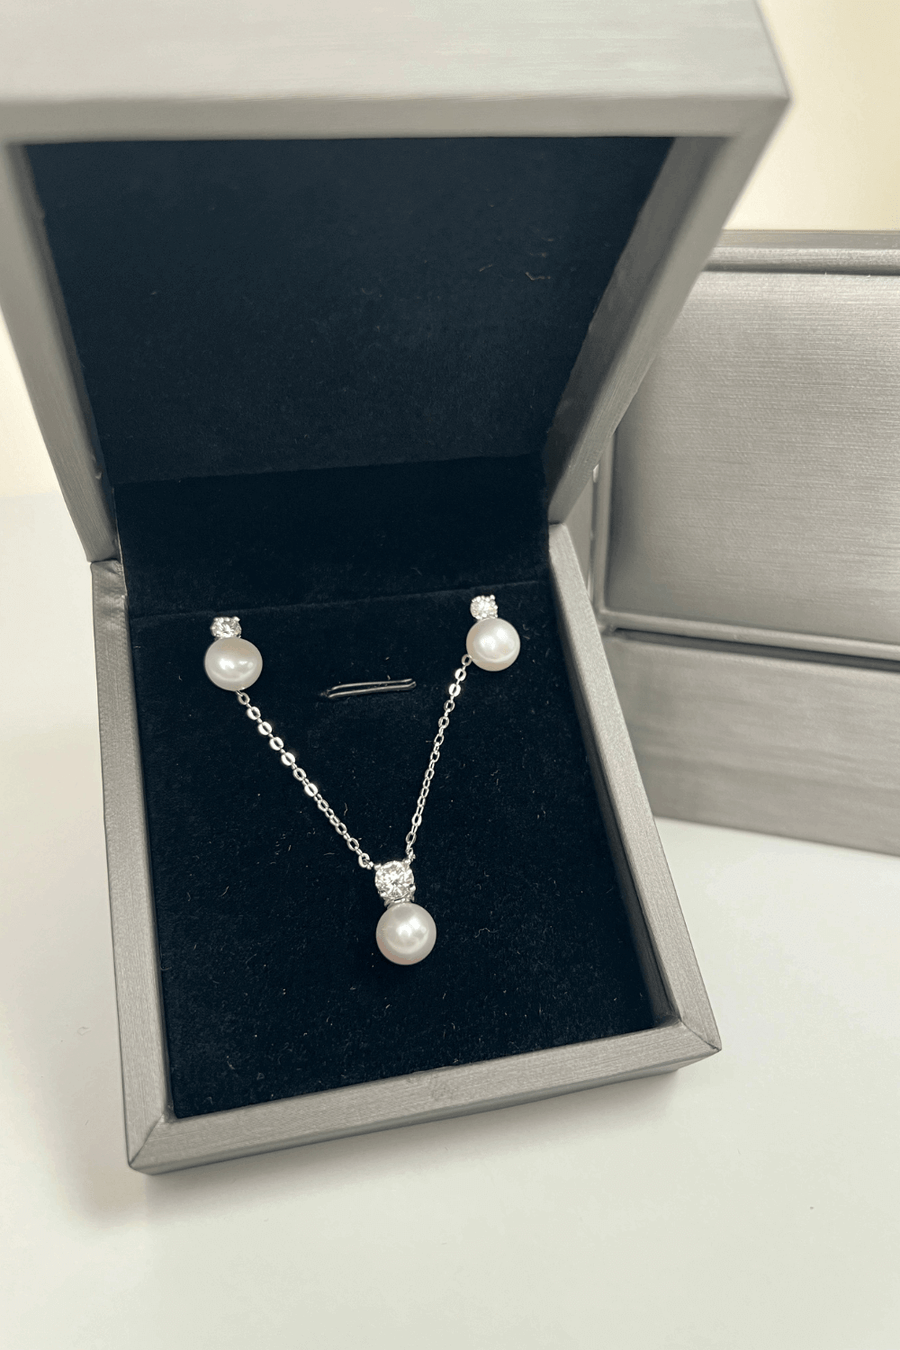 Best Diamond Jewelry Bundle Set Gift | Best Pearl Diamond Necklace, Earrings Jewelry Gift for Women, Mother, Wife, Daughter | MASON New York